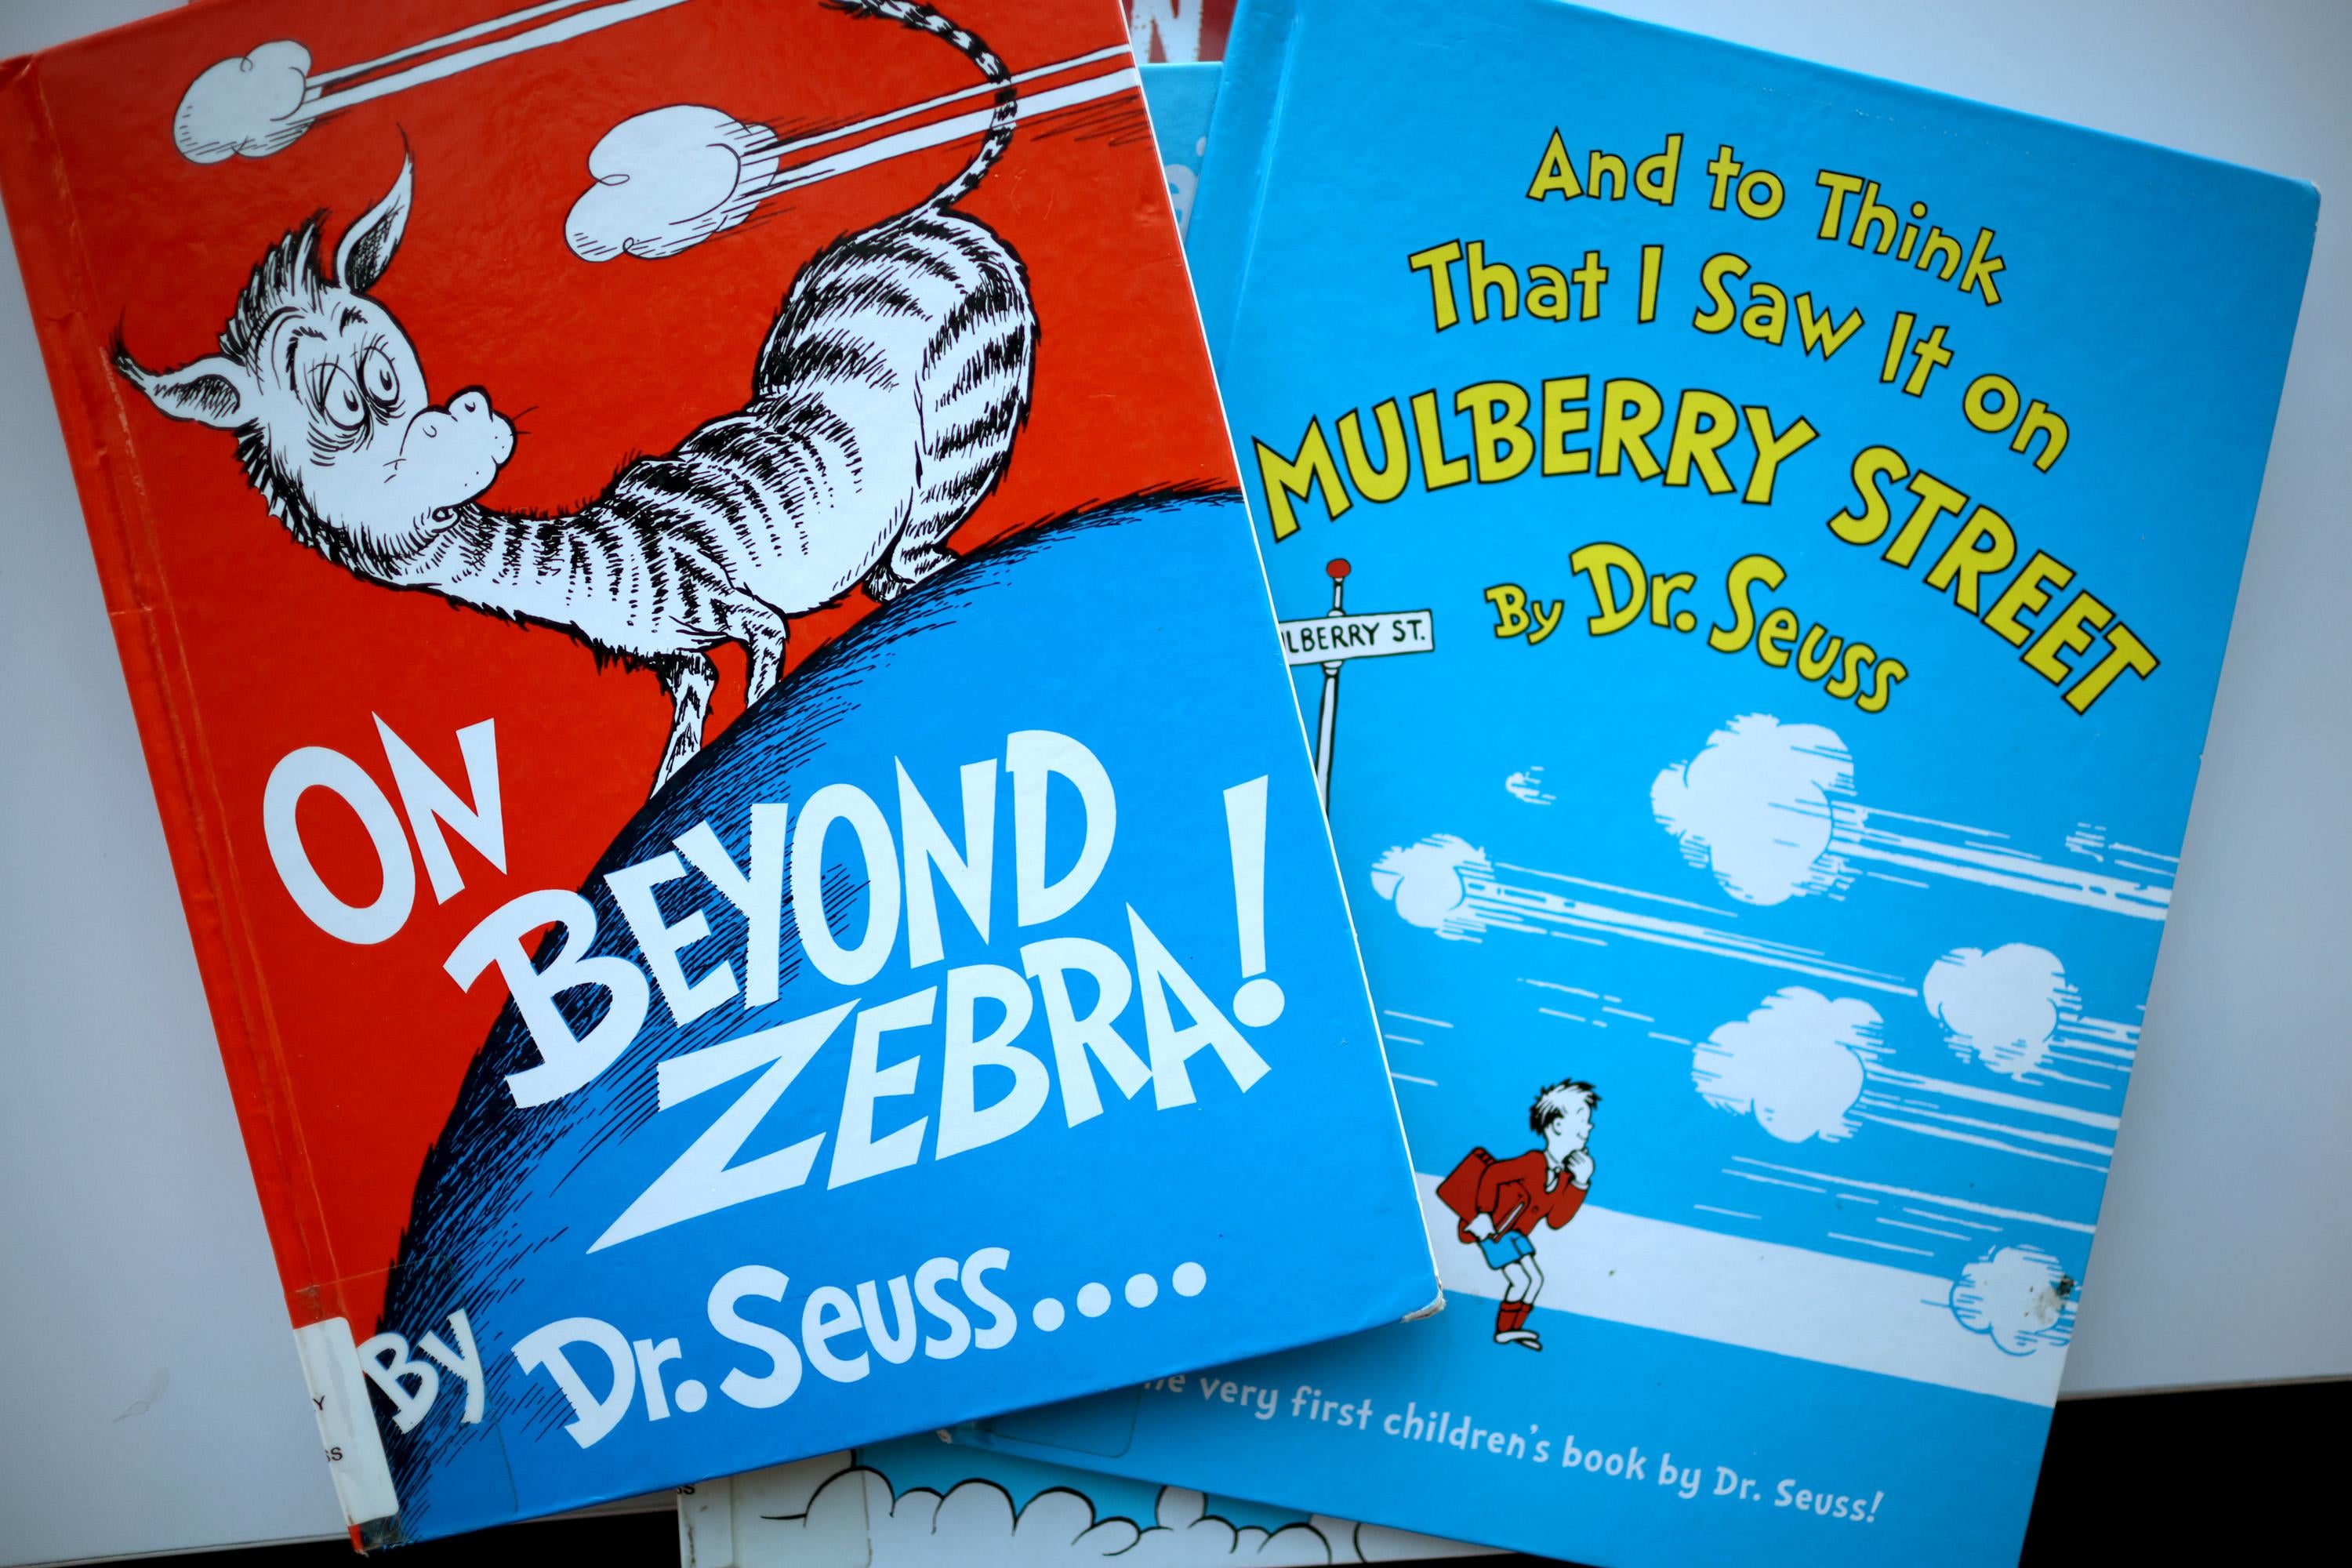 The covers of the two books, both of which bear Seuss’ classic, colorful style